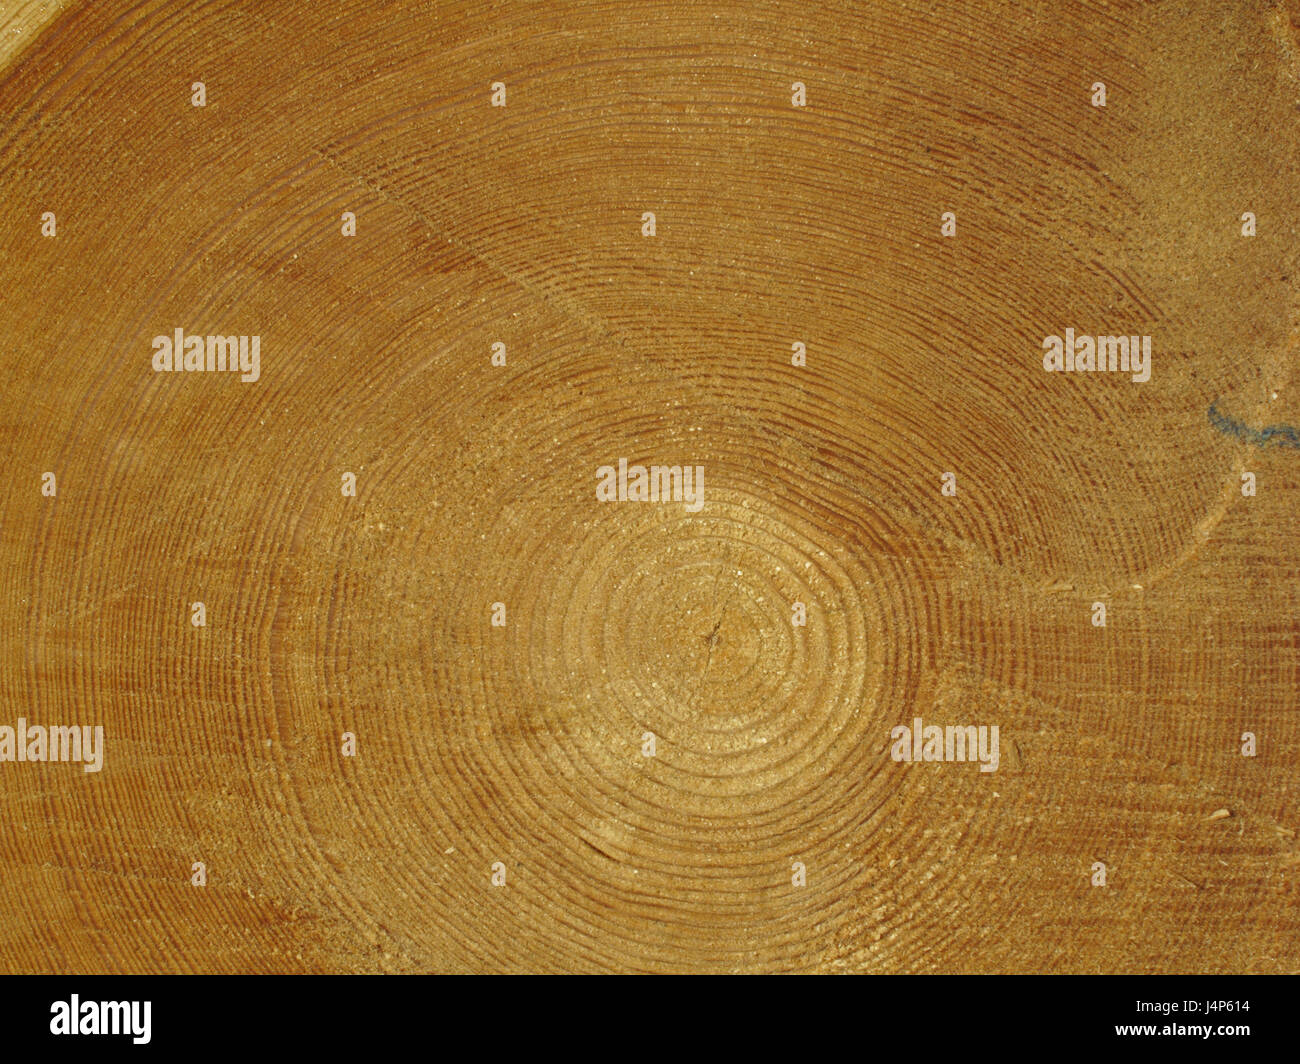 Trunk, cross-sectional area, tree-rings, detail, tree, strain, woodwork, energy, fire woodwork, heating, heat, fuel, energy supplier, natural, raw material, renewable, growing again, economy, firewood, timber, structure, rings, annual run, time execution, natural history, natural product, Stock Photo